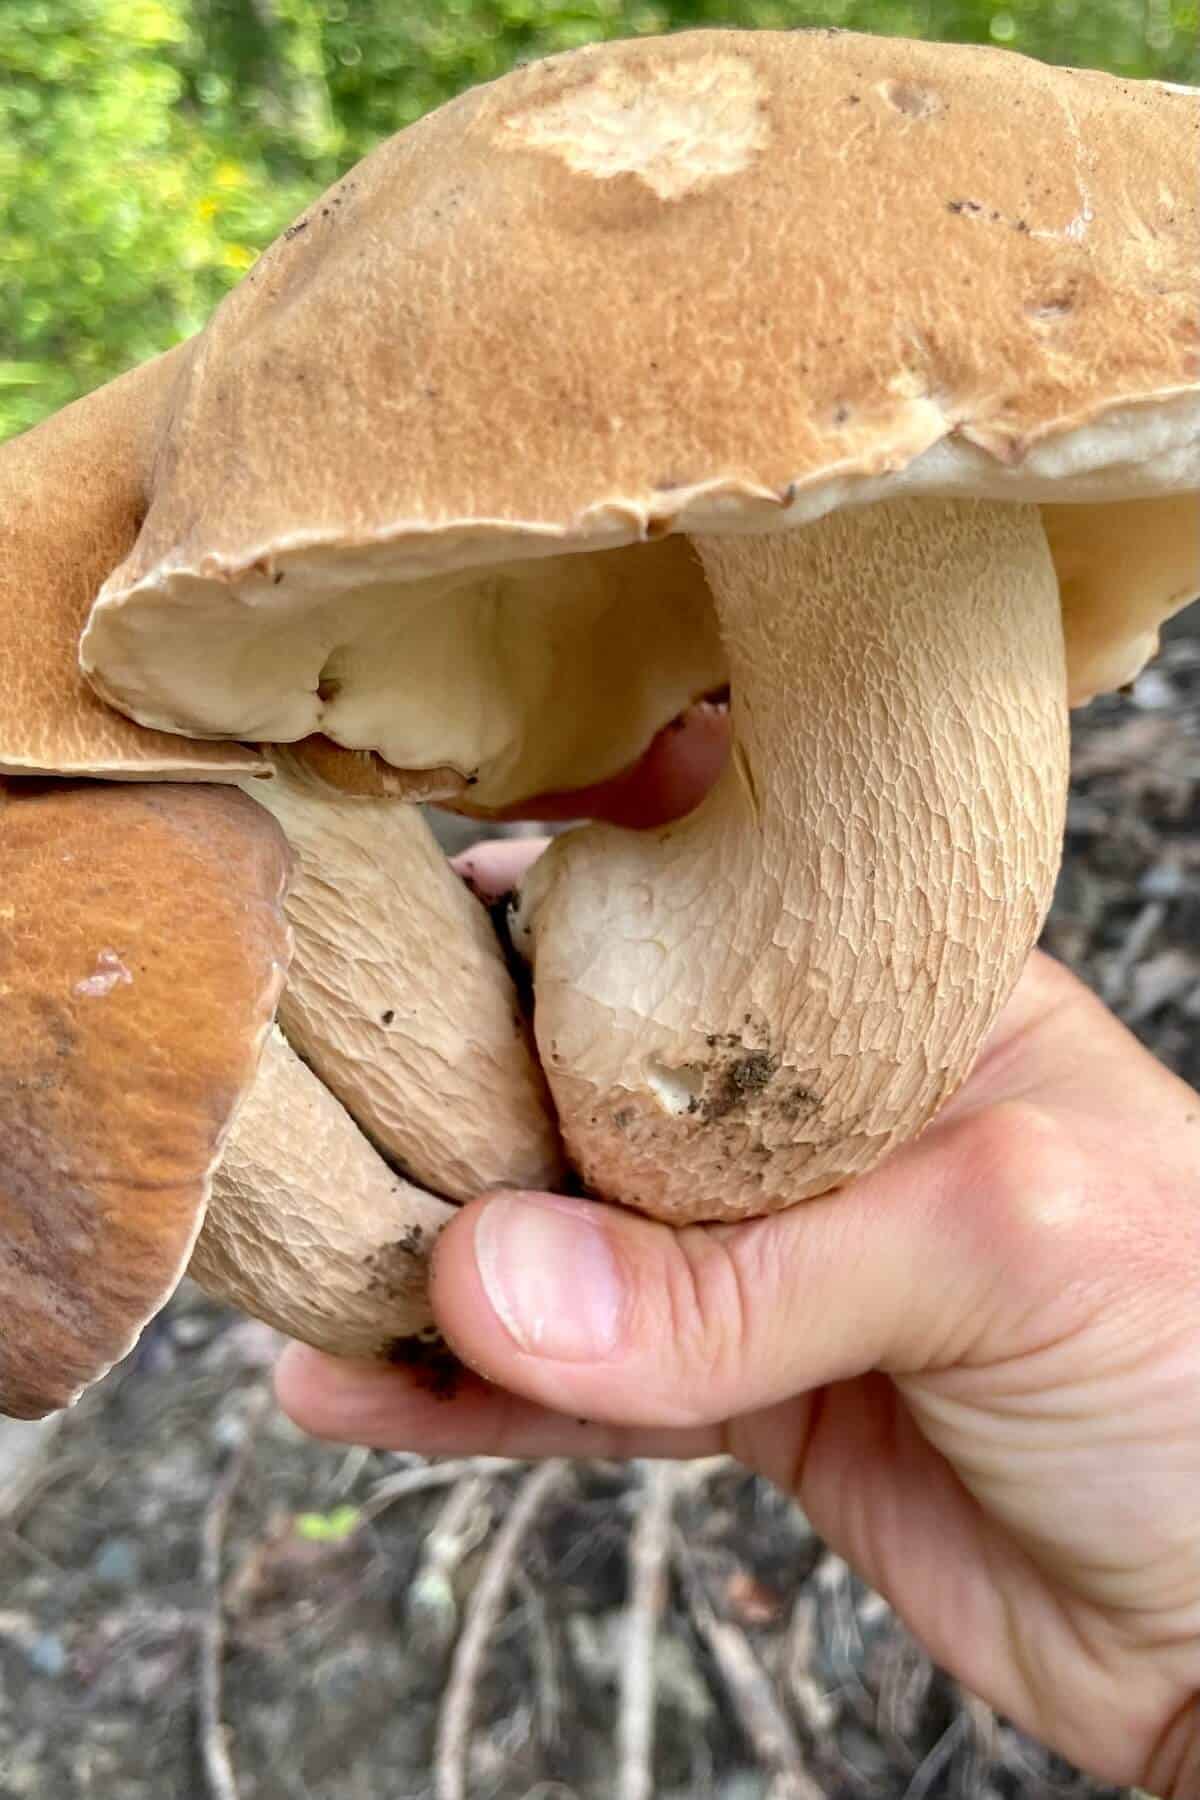 Holding large porcini mushrooms in hand.